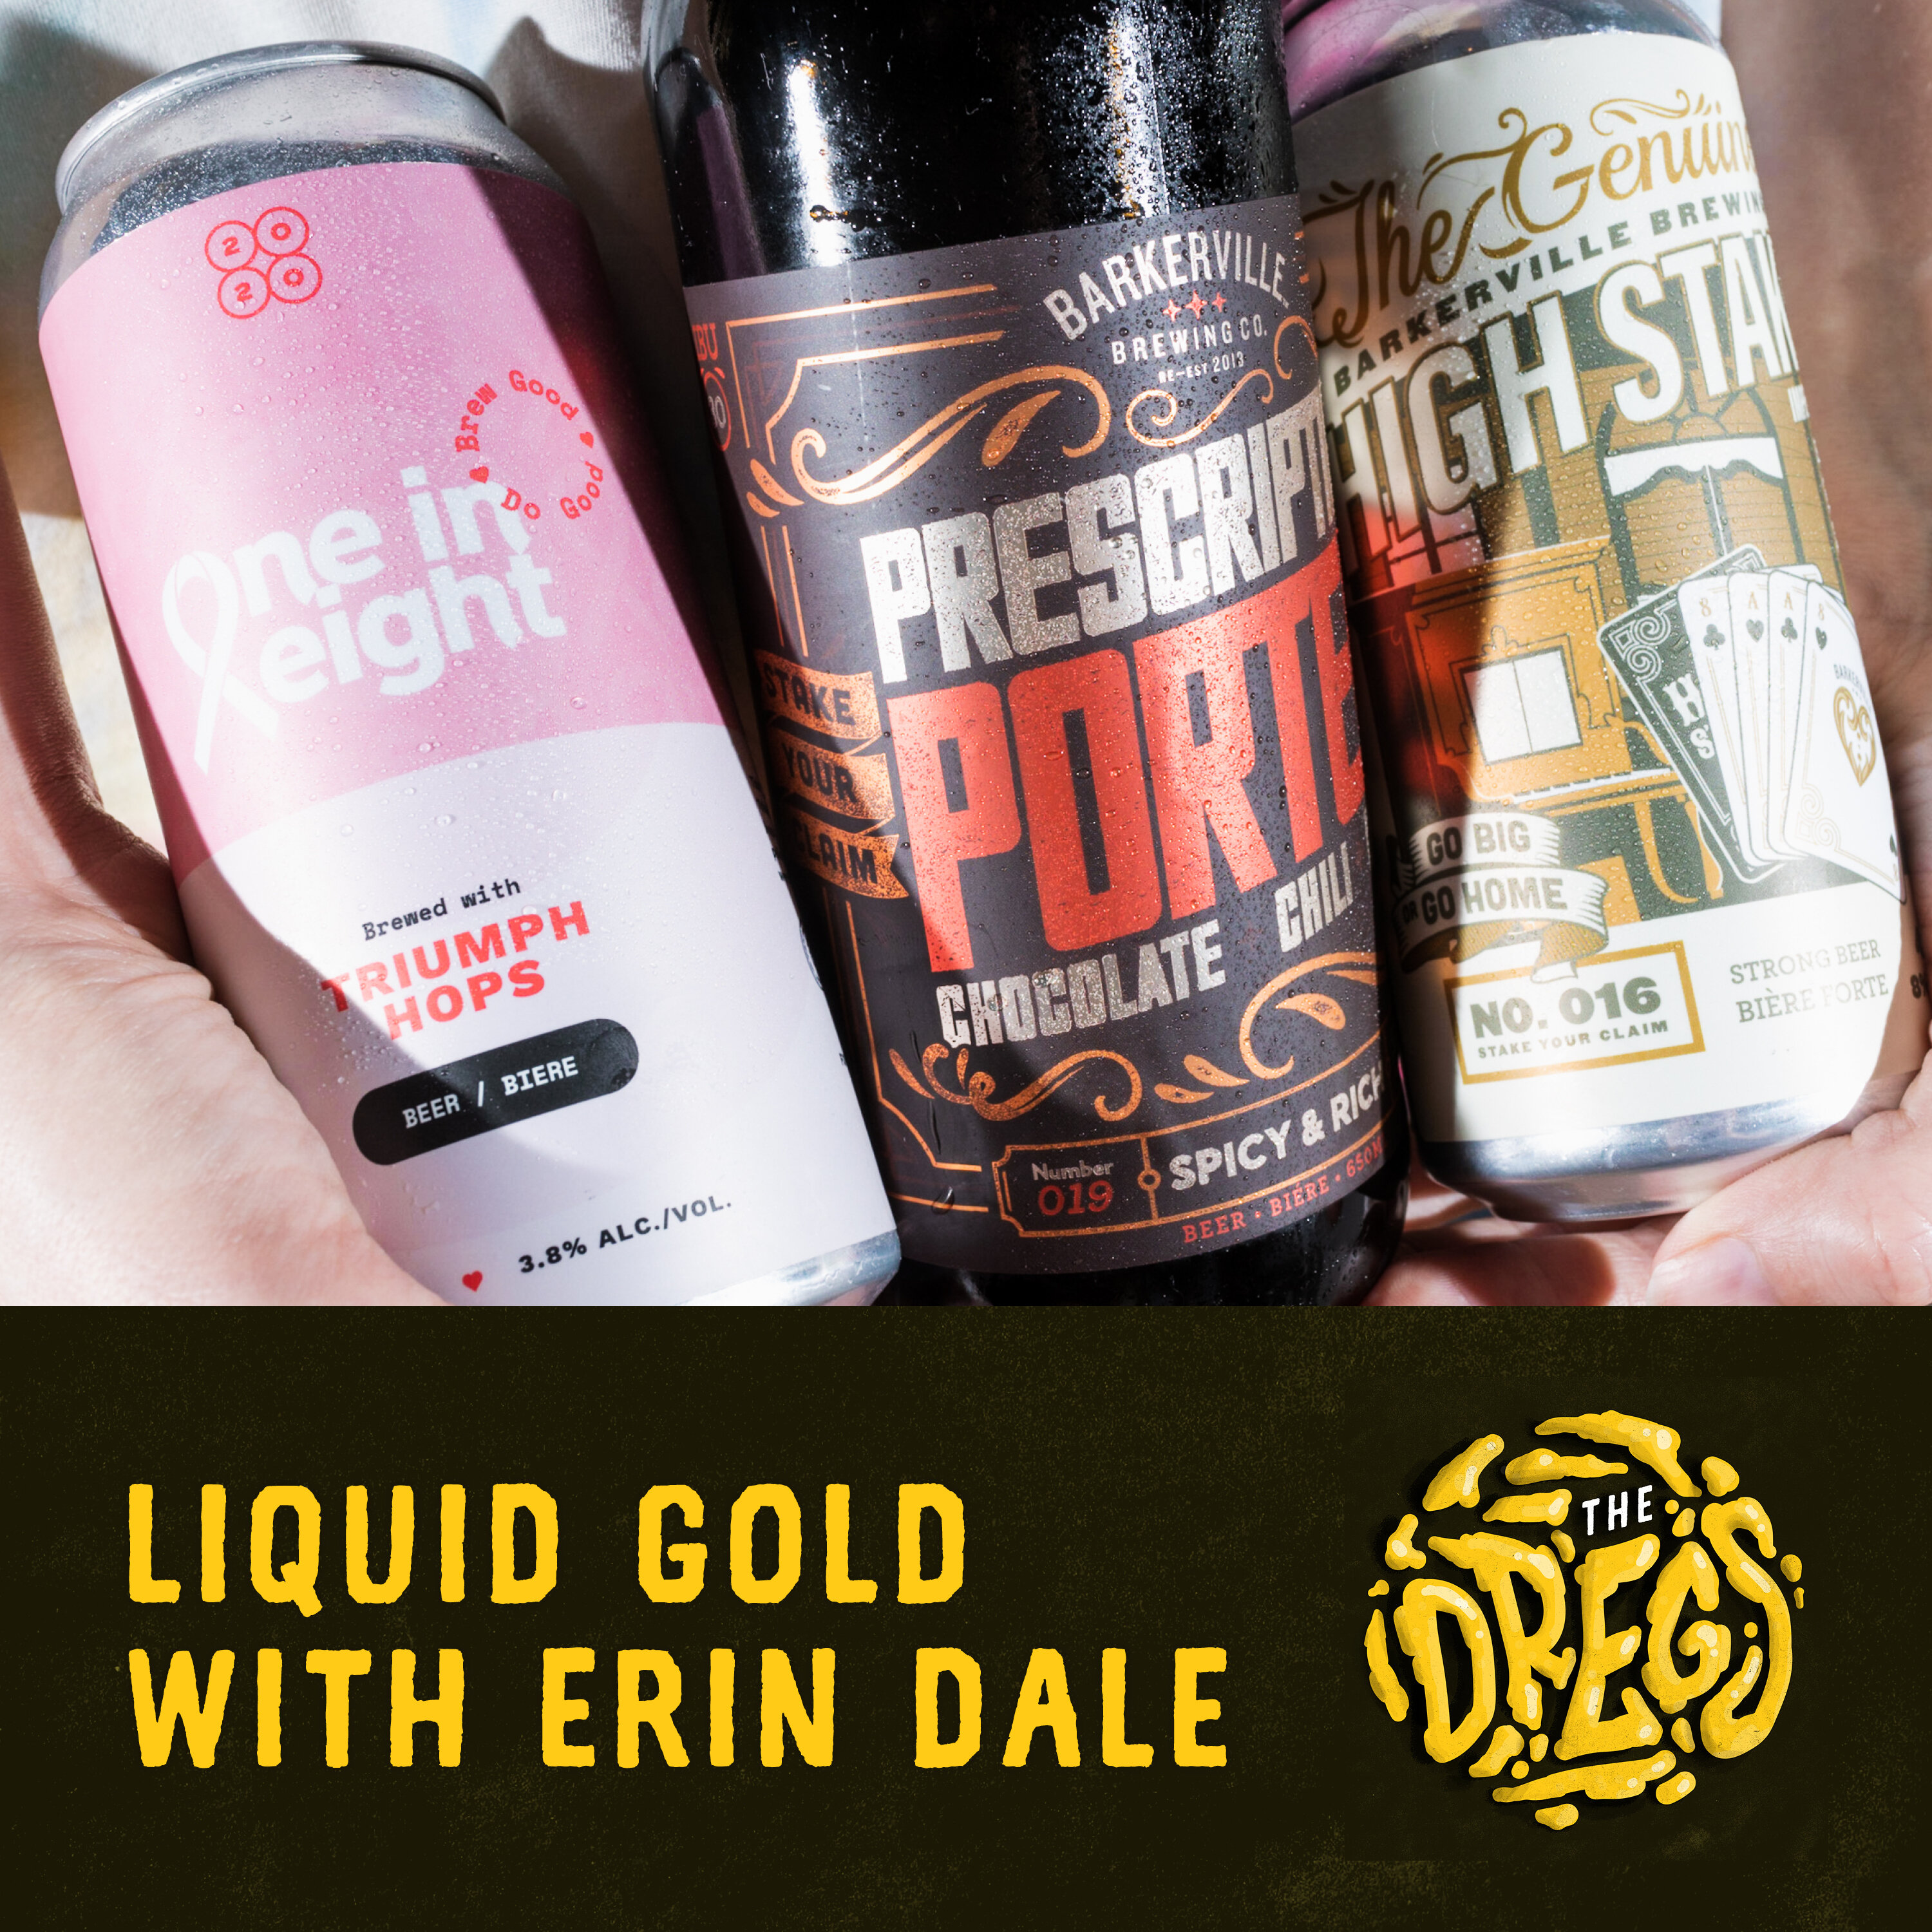 Liquid Gold with Erin Dale Image